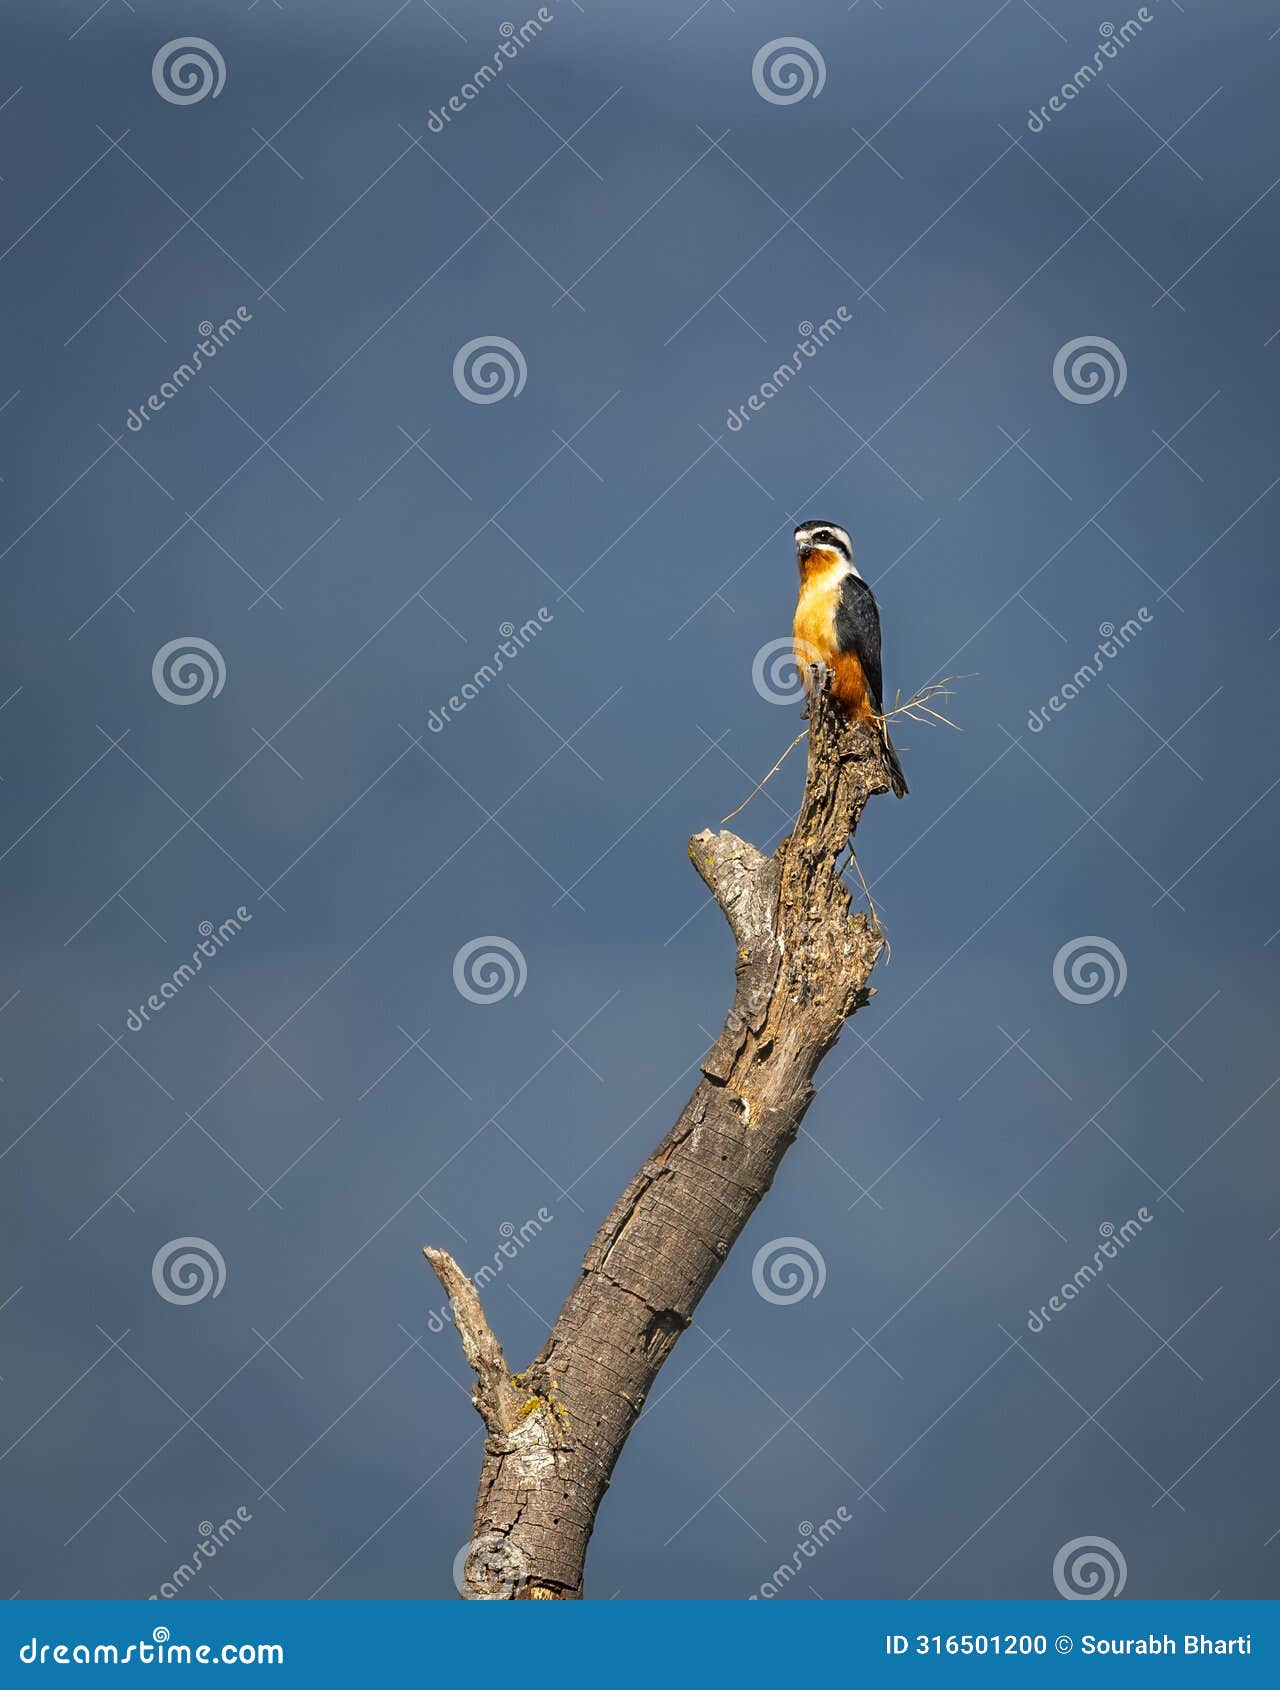 collared falconet or microhierax caerulescens bird of prey falconidae perched high on tree natural blue sky background at dhikala